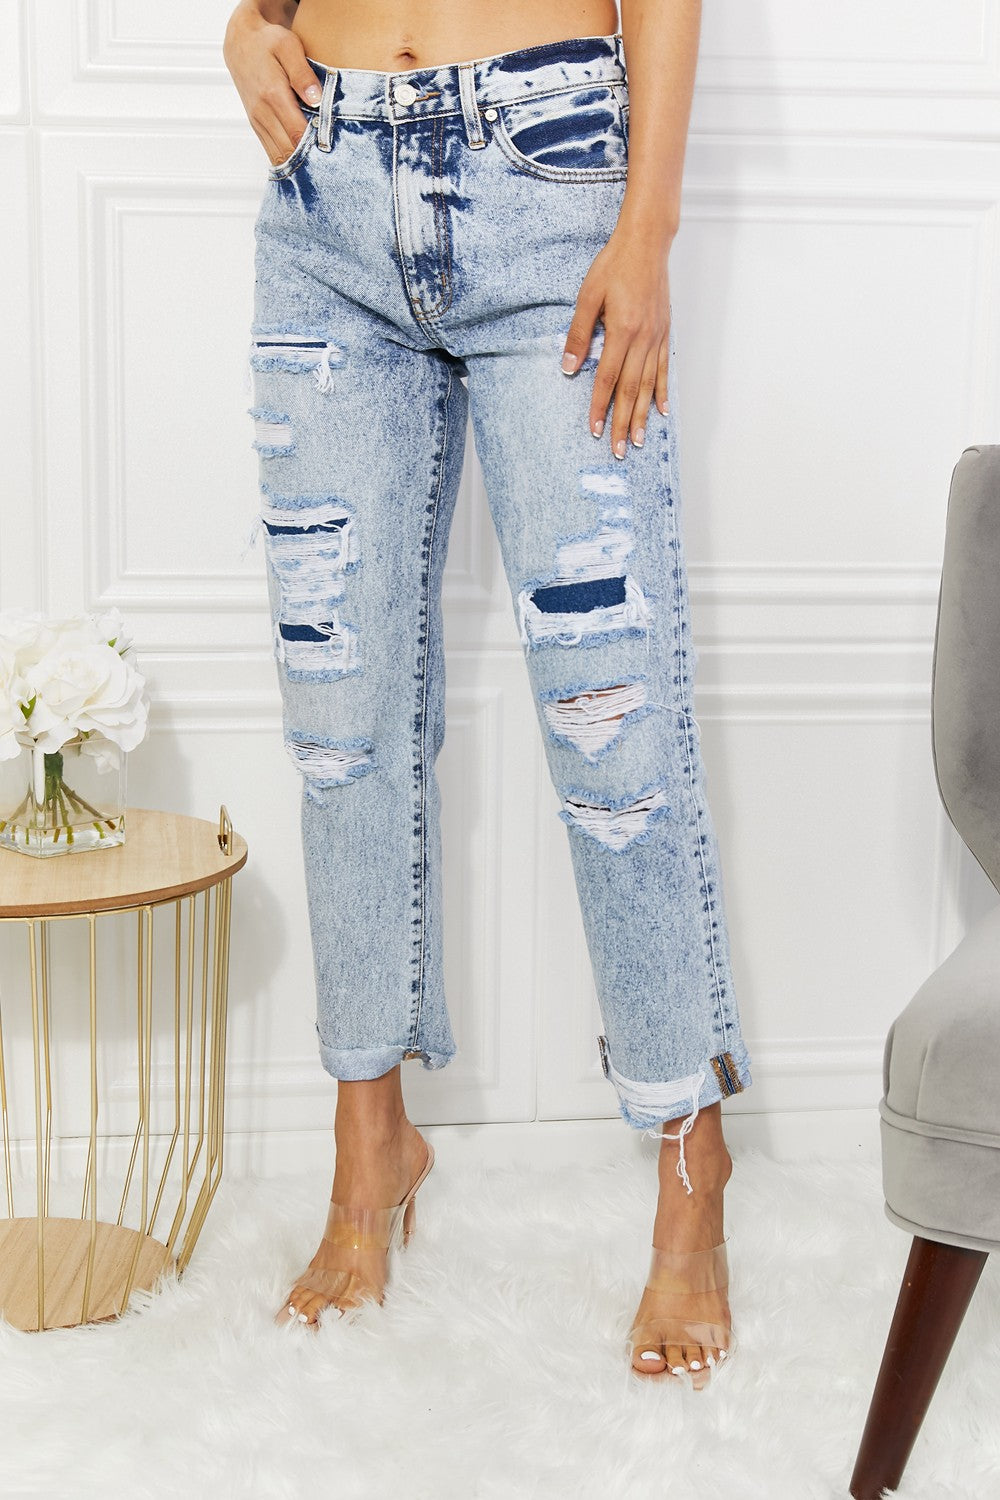 Kancan Kendra High Rise Distressed Straight Jeans - ONLINE ONLY 2-10 DAY SHIPPING